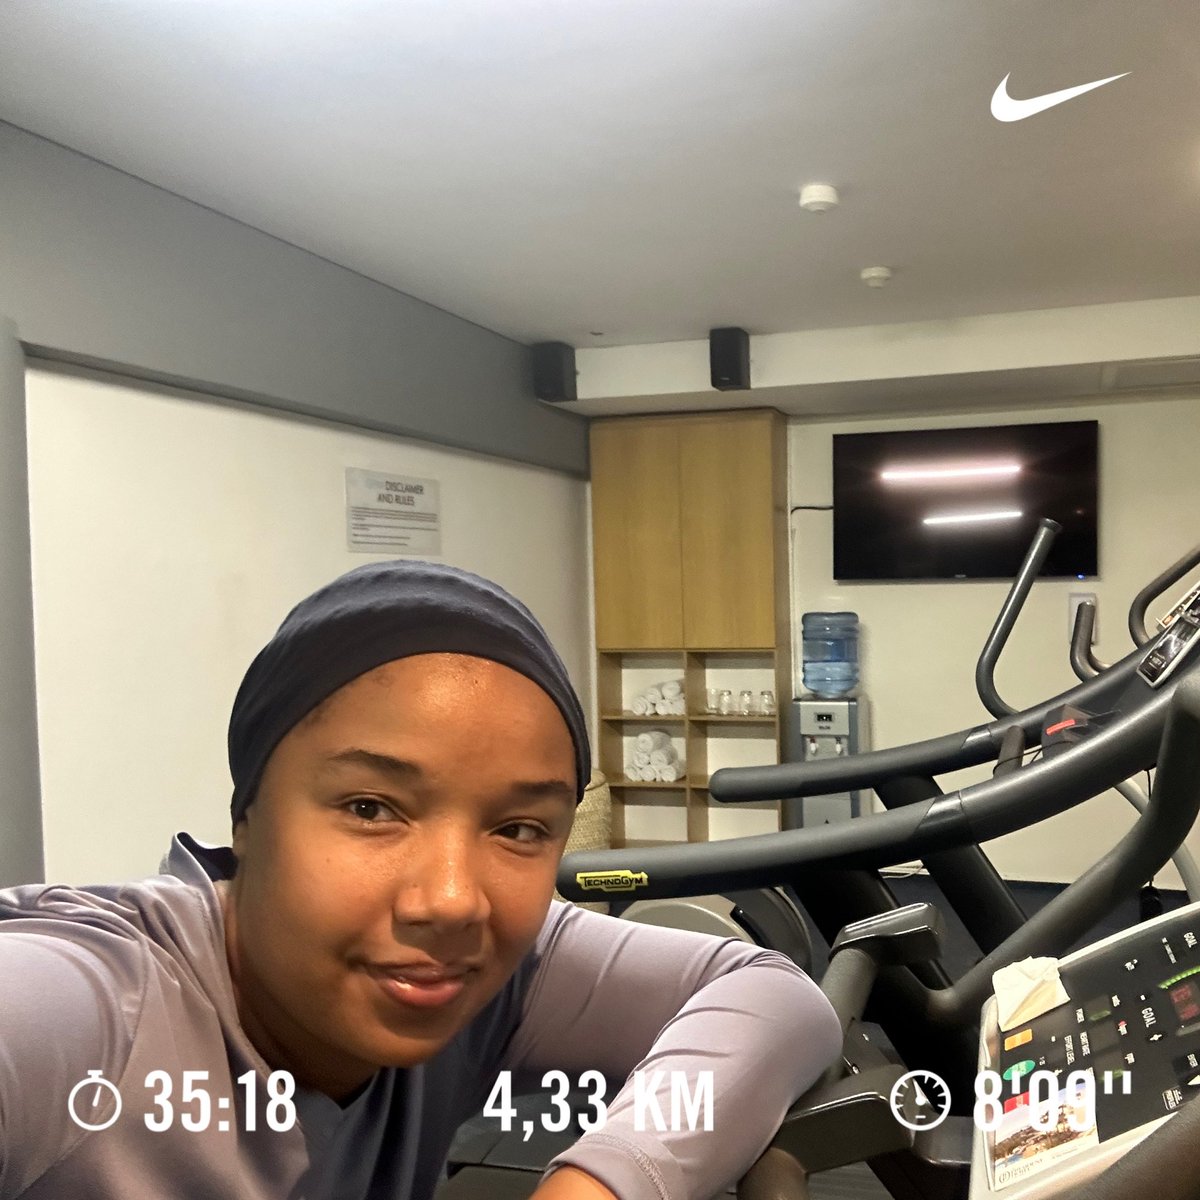 We tried again this morning 🌬️
#IPaintedMyRun 
#IChoose2BActive 
#FetchYourBody2023 
#DiscoveryVitality 
#RunningWithSoleAC 
#RunningWithTumiSole